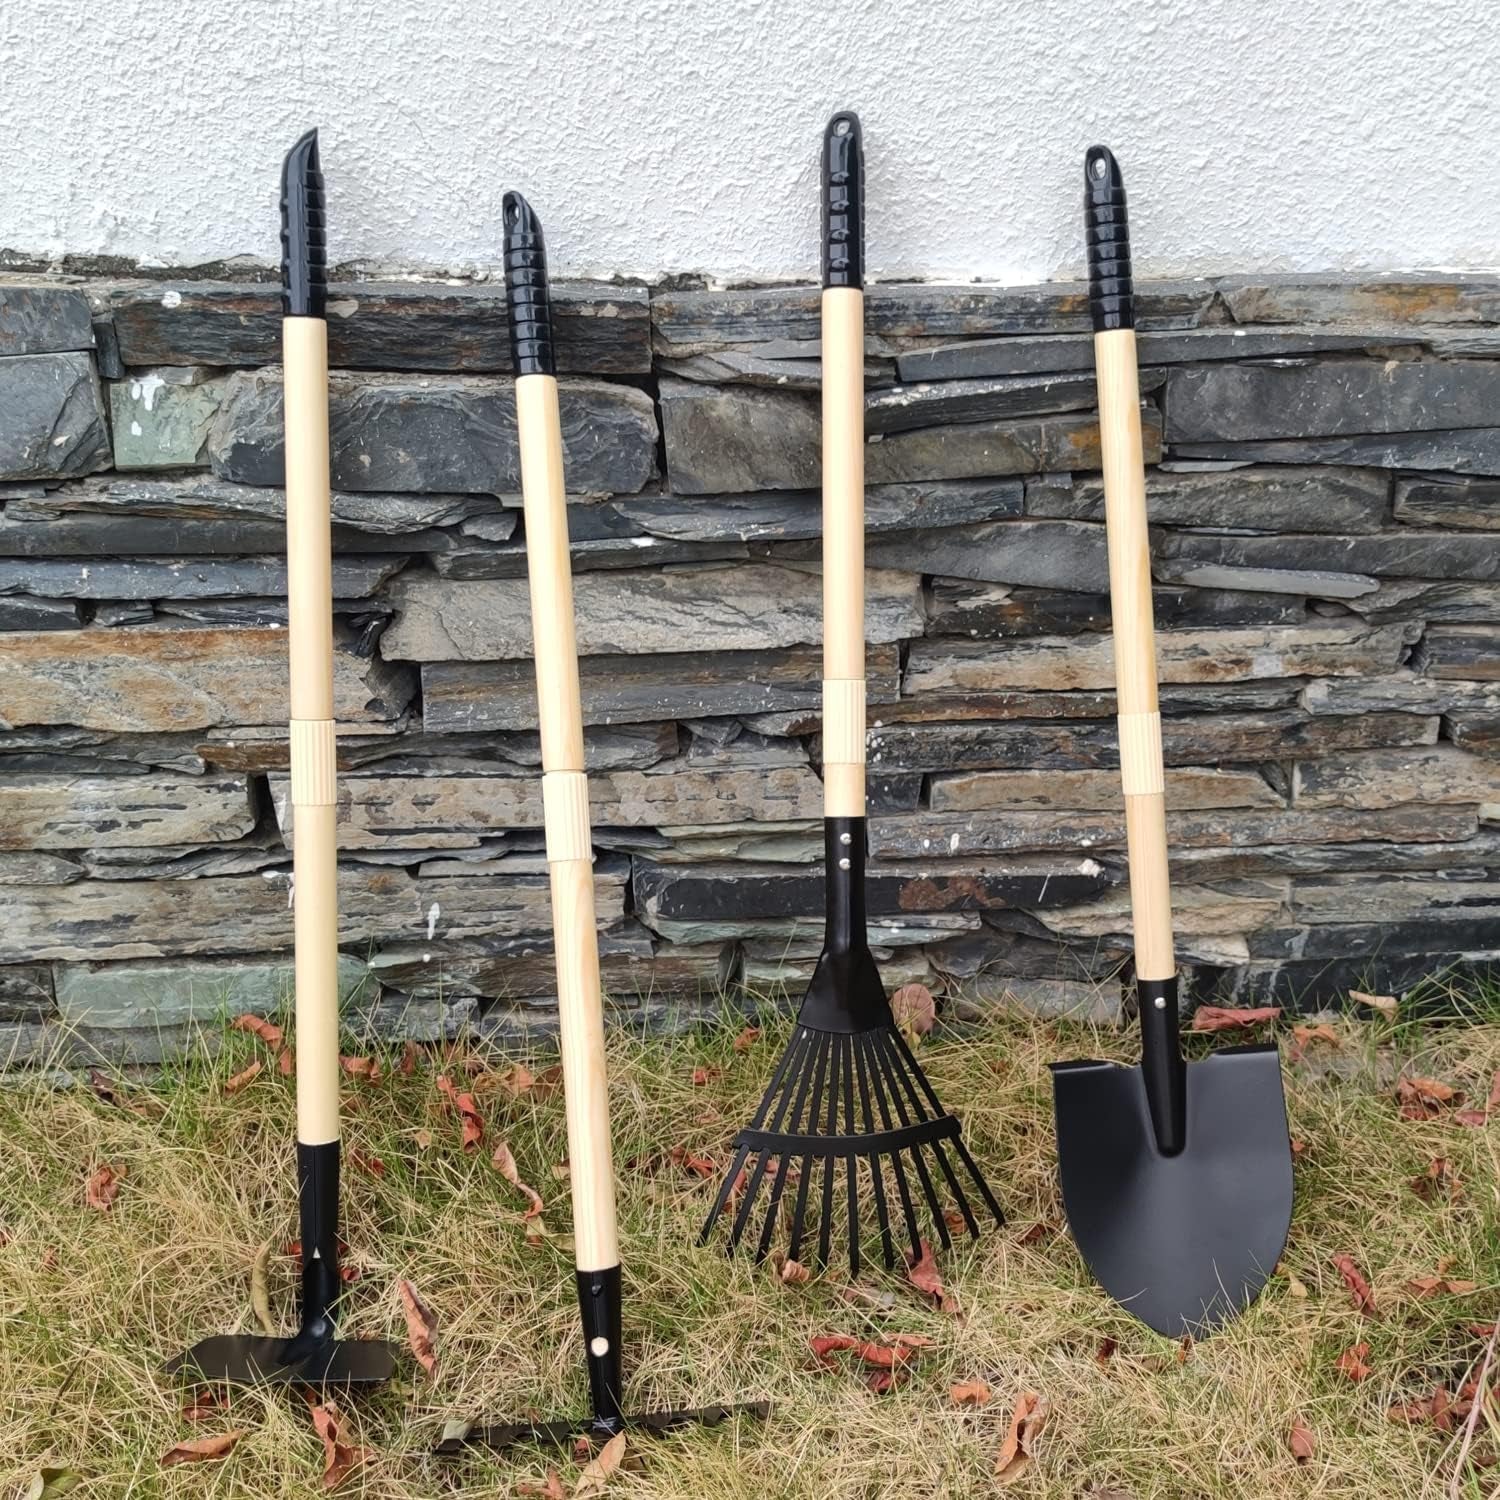 7PCS Kids Gardening Tools, Long Shovel, Rake for Leaves, Spade, Hoe, Steel Heads & Real Wood Handle, Yard Tools for Children Toddlers Gifts